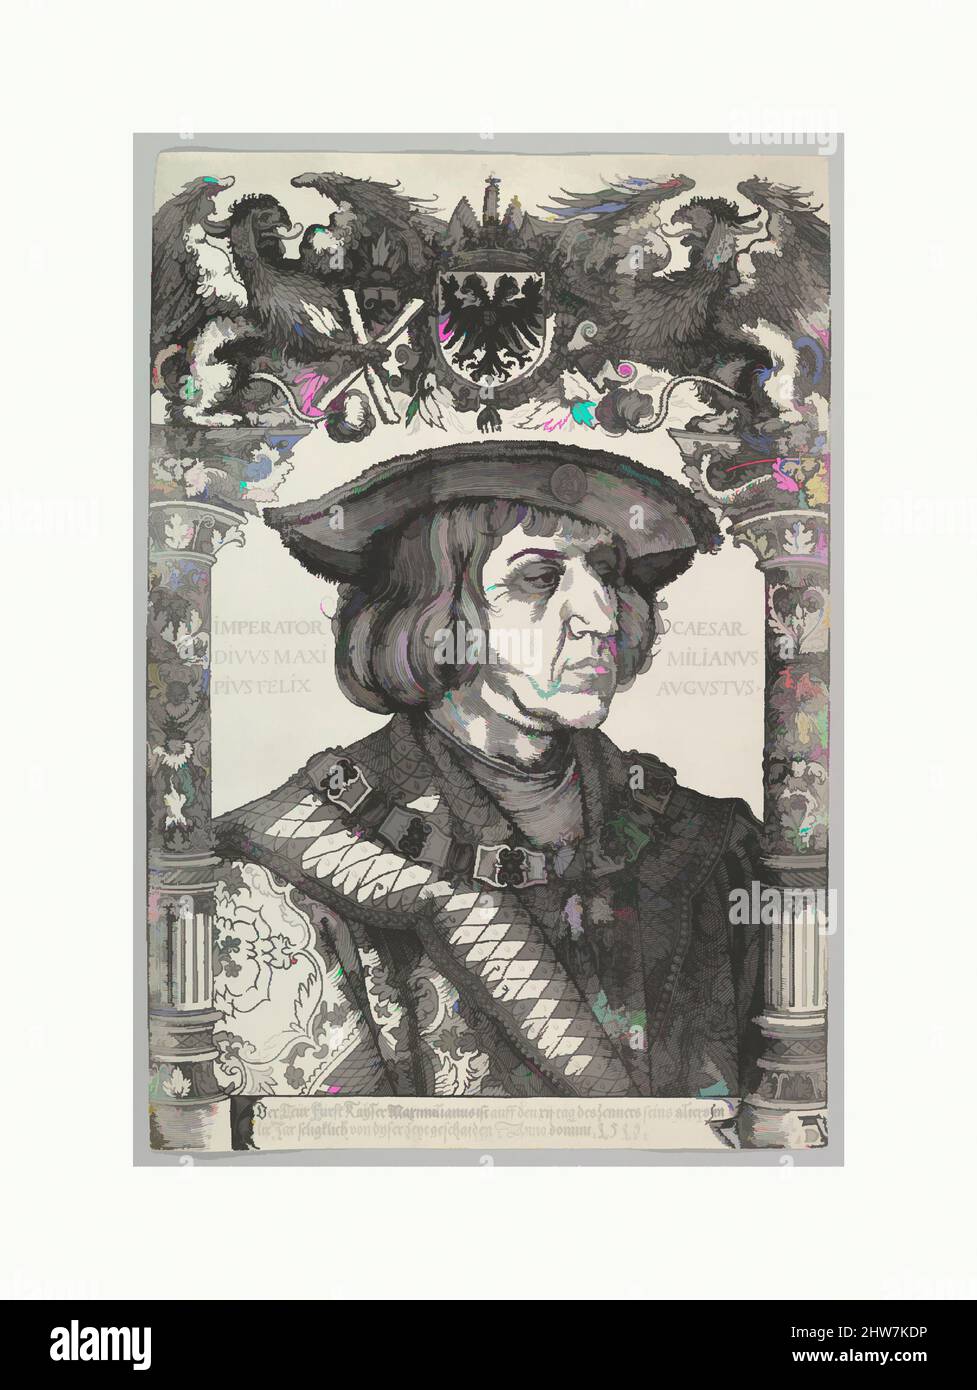 Art inspired by Portrait of Emperor Maximilian I, 1519, Woodcut, sheet: 21 13/16 x 14 15/16 in. (55.4 x 38 cm), Prints, Hans Weiditz the Younger (German, Freiburg im Breisgau before 1500–ca. 1536 Strasbourg), After Albrecht Dürer (German, Nuremberg 1471–1528 Nuremberg), A celebrated, Classic works modernized by Artotop with a splash of modernity. Shapes, color and value, eye-catching visual impact on art. Emotions through freedom of artworks in a contemporary way. A timeless message pursuing a wildly creative new direction. Artists turning to the digital medium and creating the Artotop NFT Stock Photo